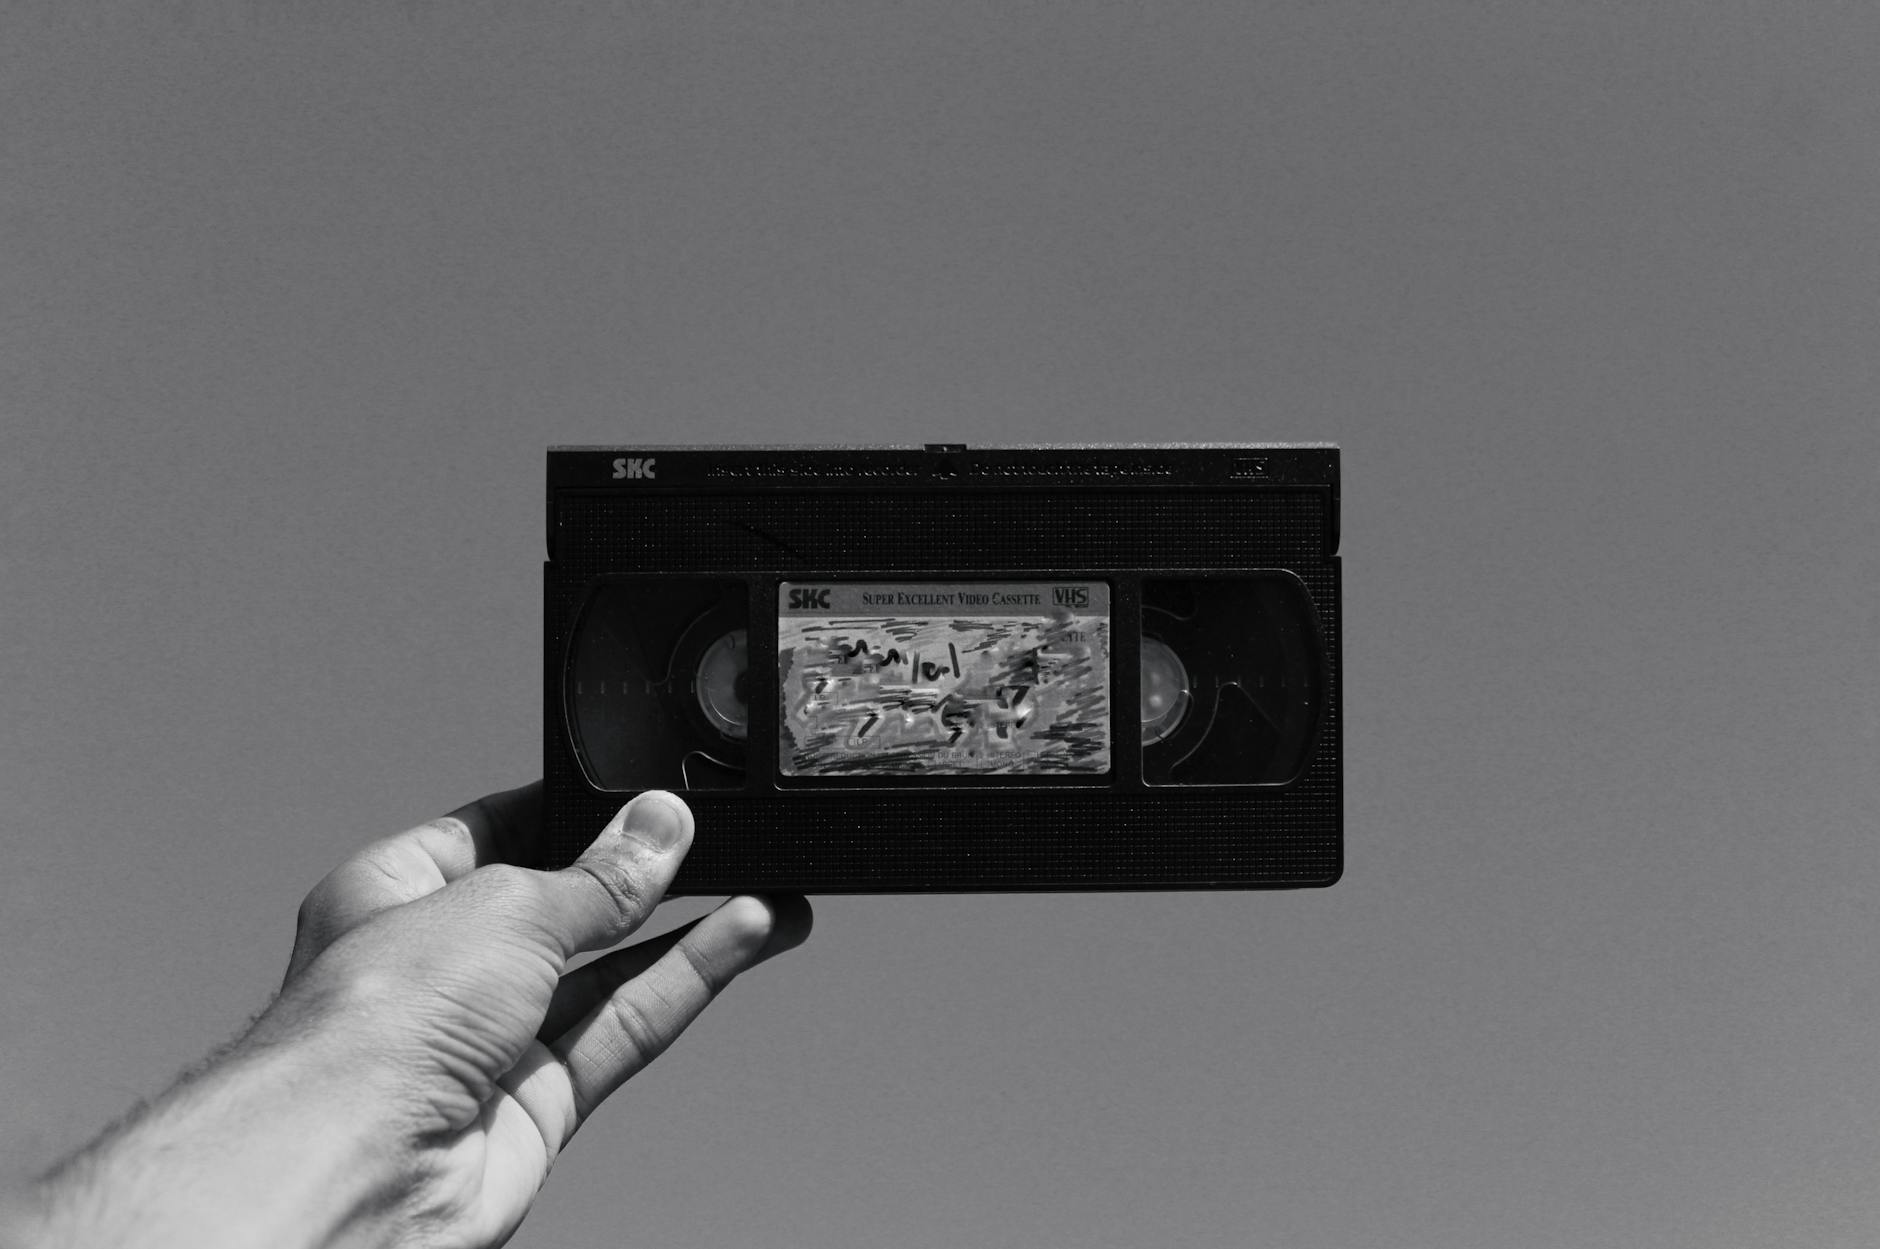 Grayscale Photography of Vhs Video Cassette · Free Stock Photo